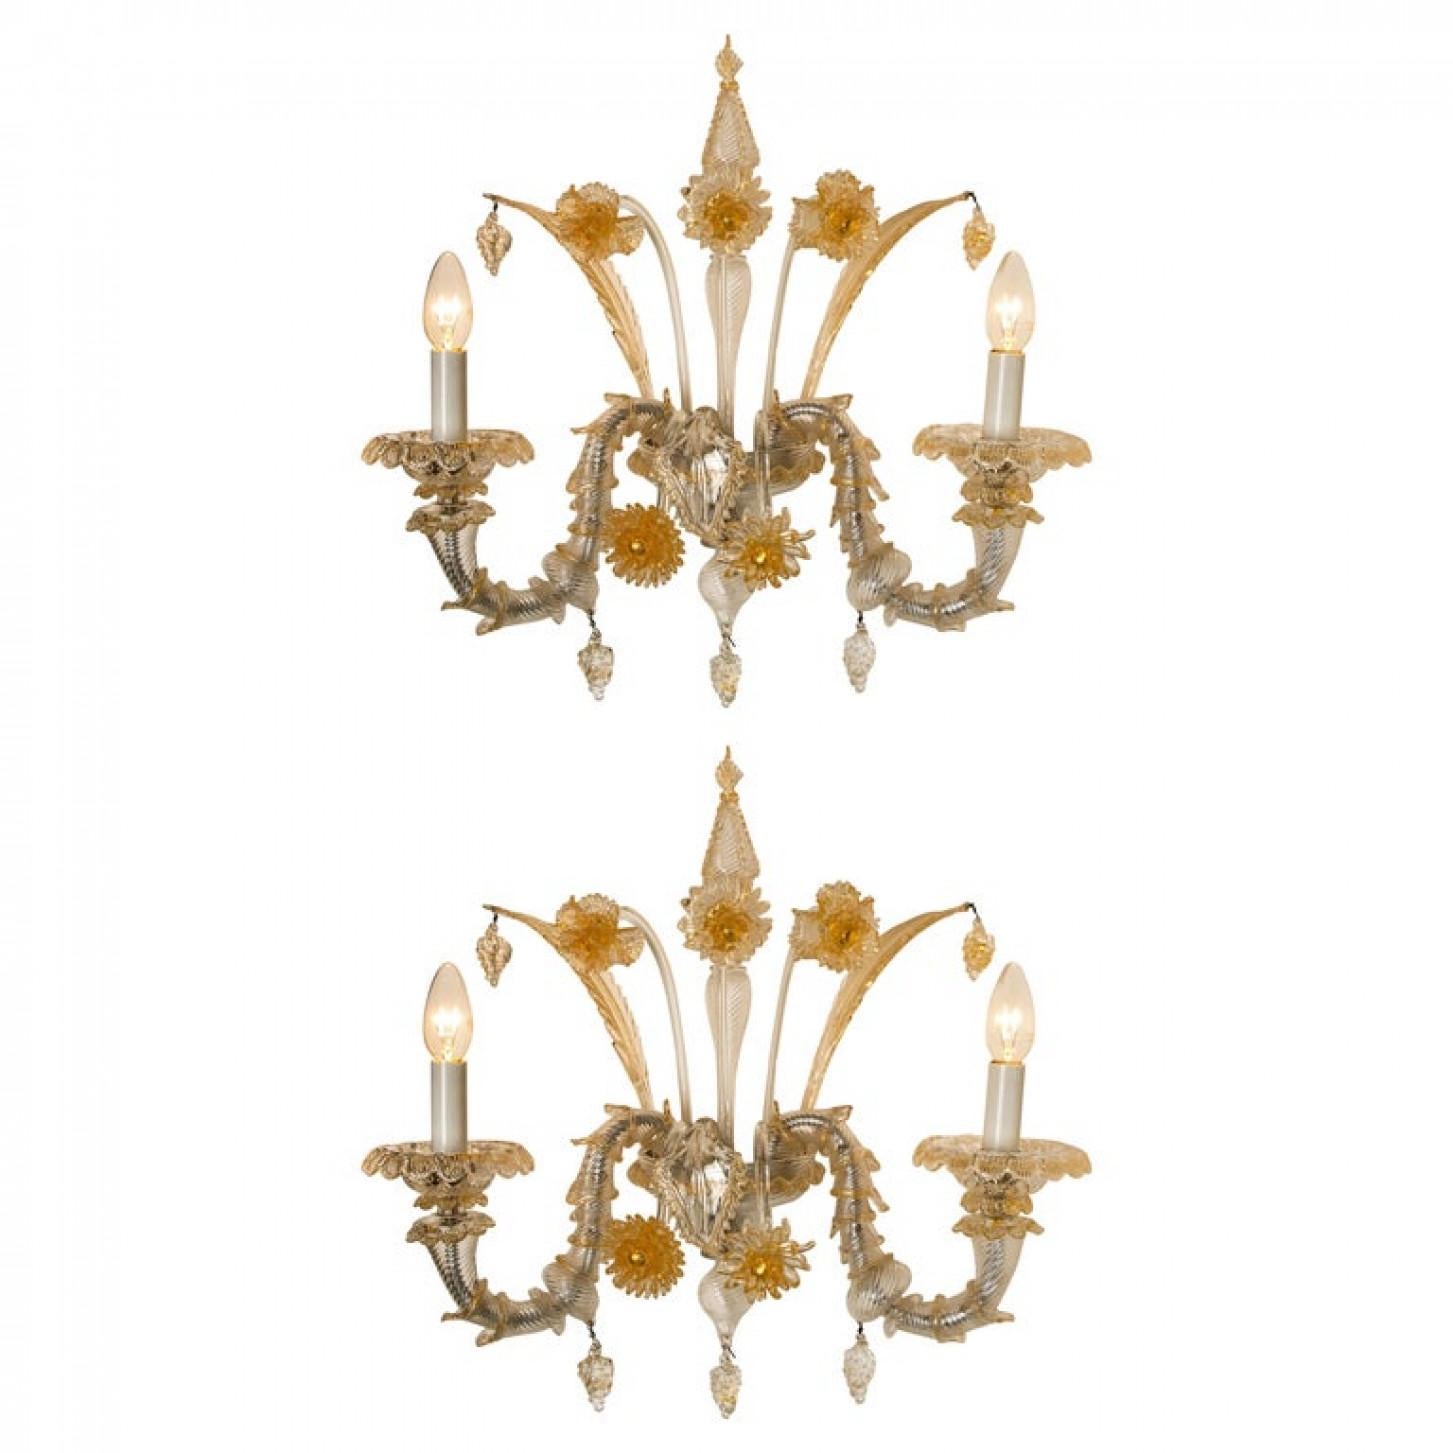 A truly rare and outstanding pair of wall lights, the lights are handmade in ribbed and curled colorless glass with aventurine inclusions. Statement pieces. Beautiful craftsmanship, Venice, Murano, circa 1960.

With grey metal mounting, central